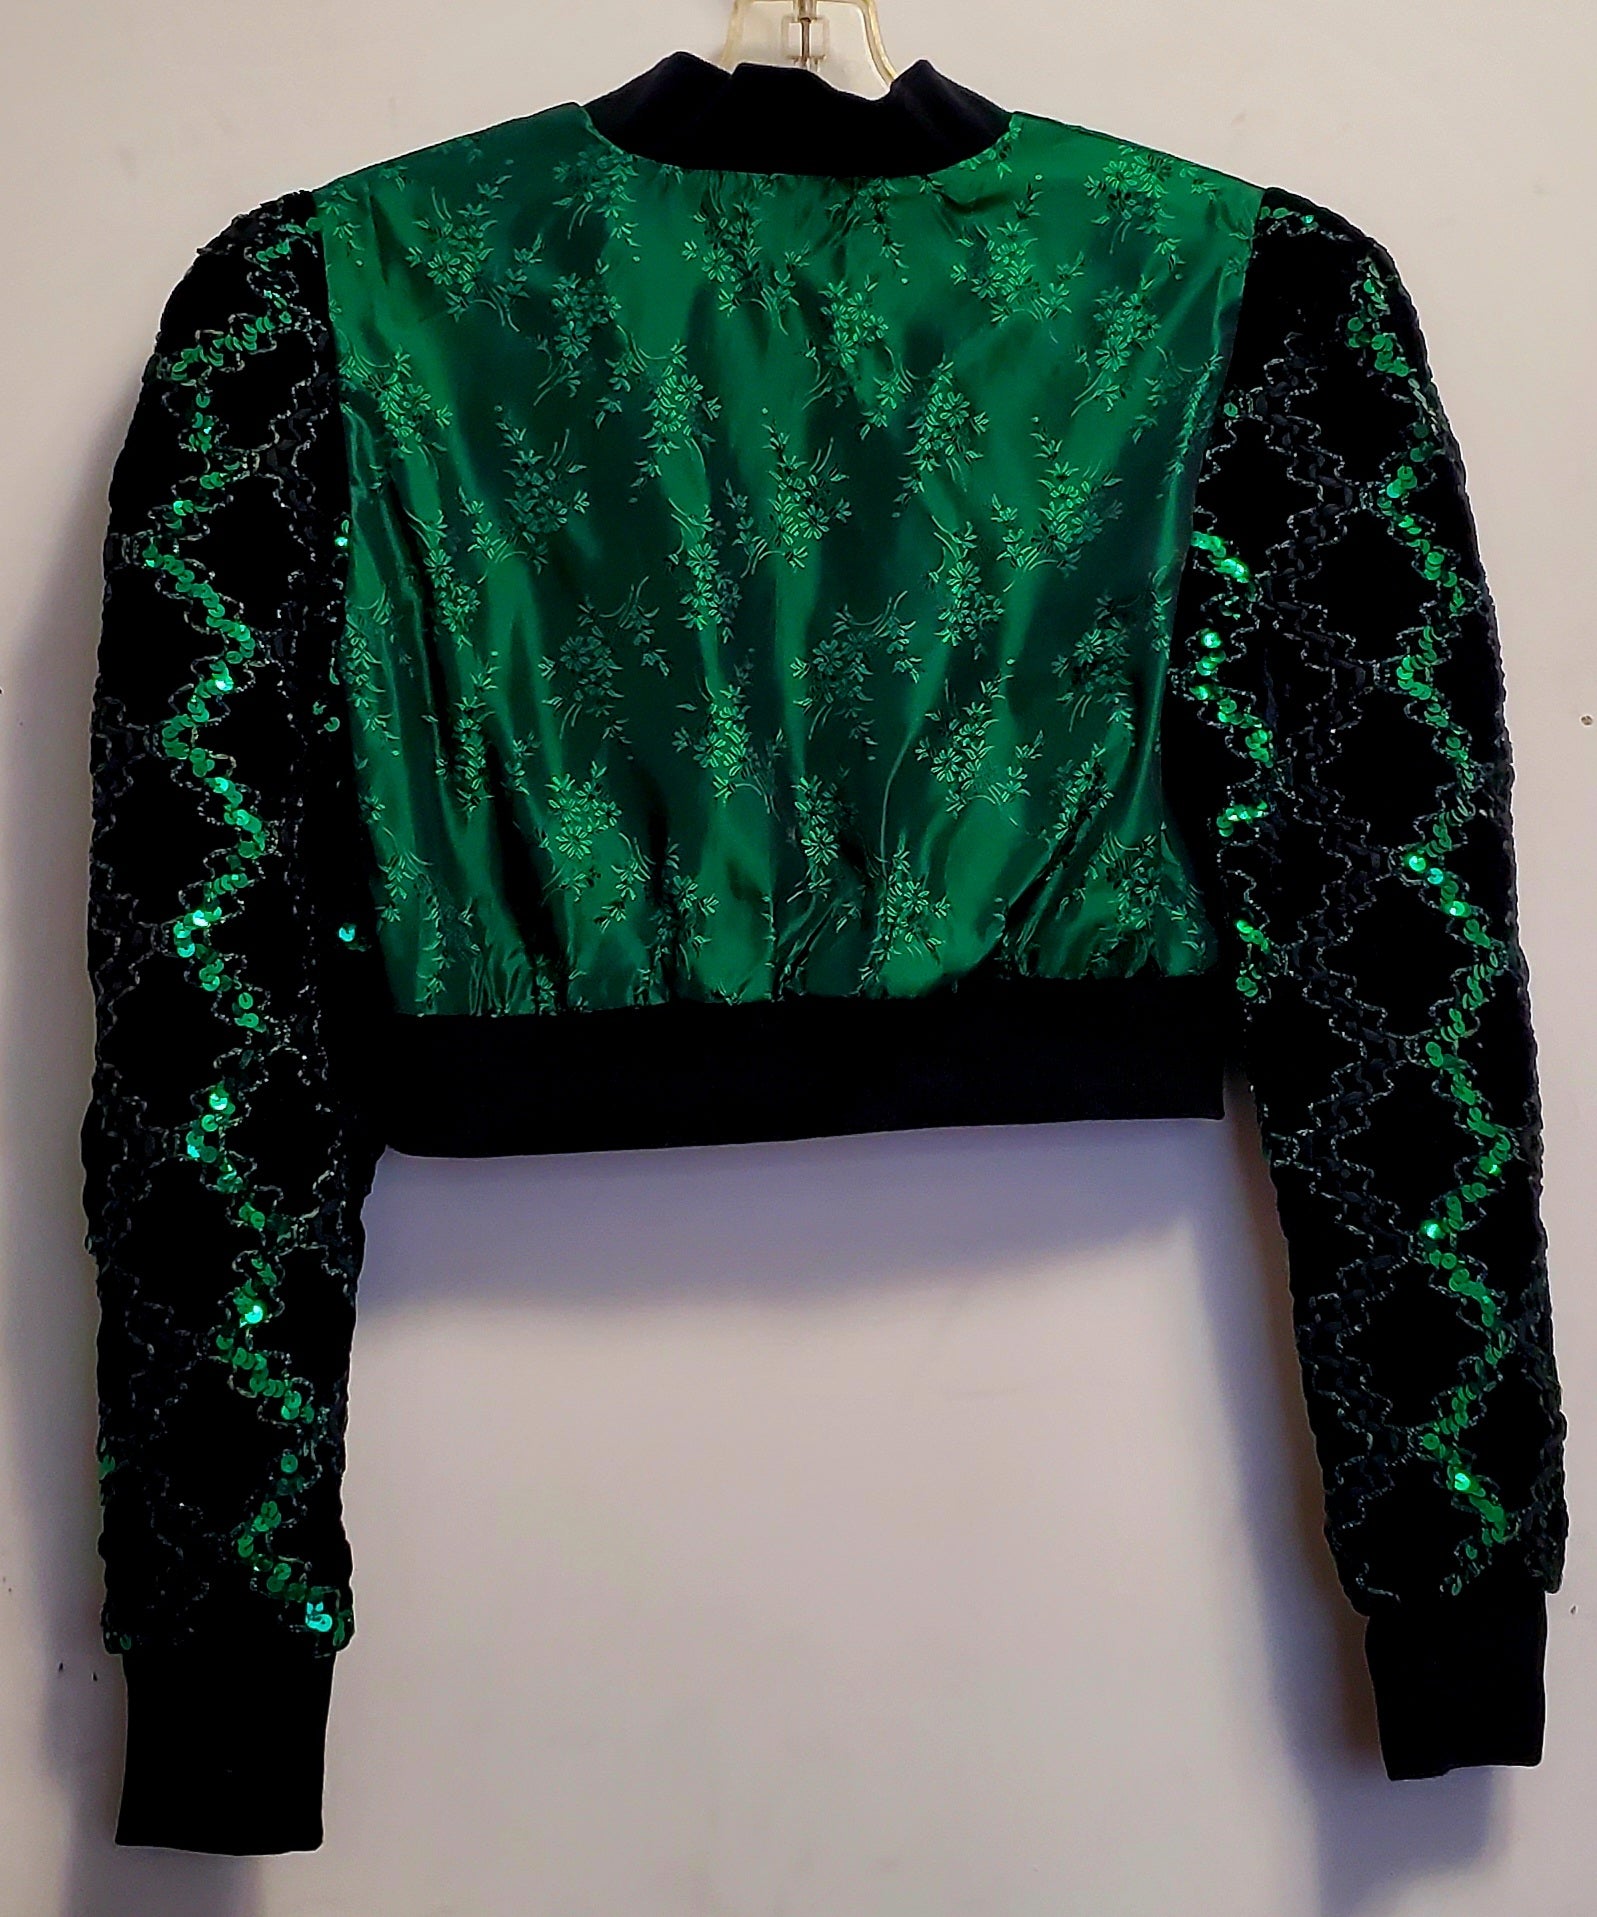 Back view of Green Damask Cropped Bomber Jacket